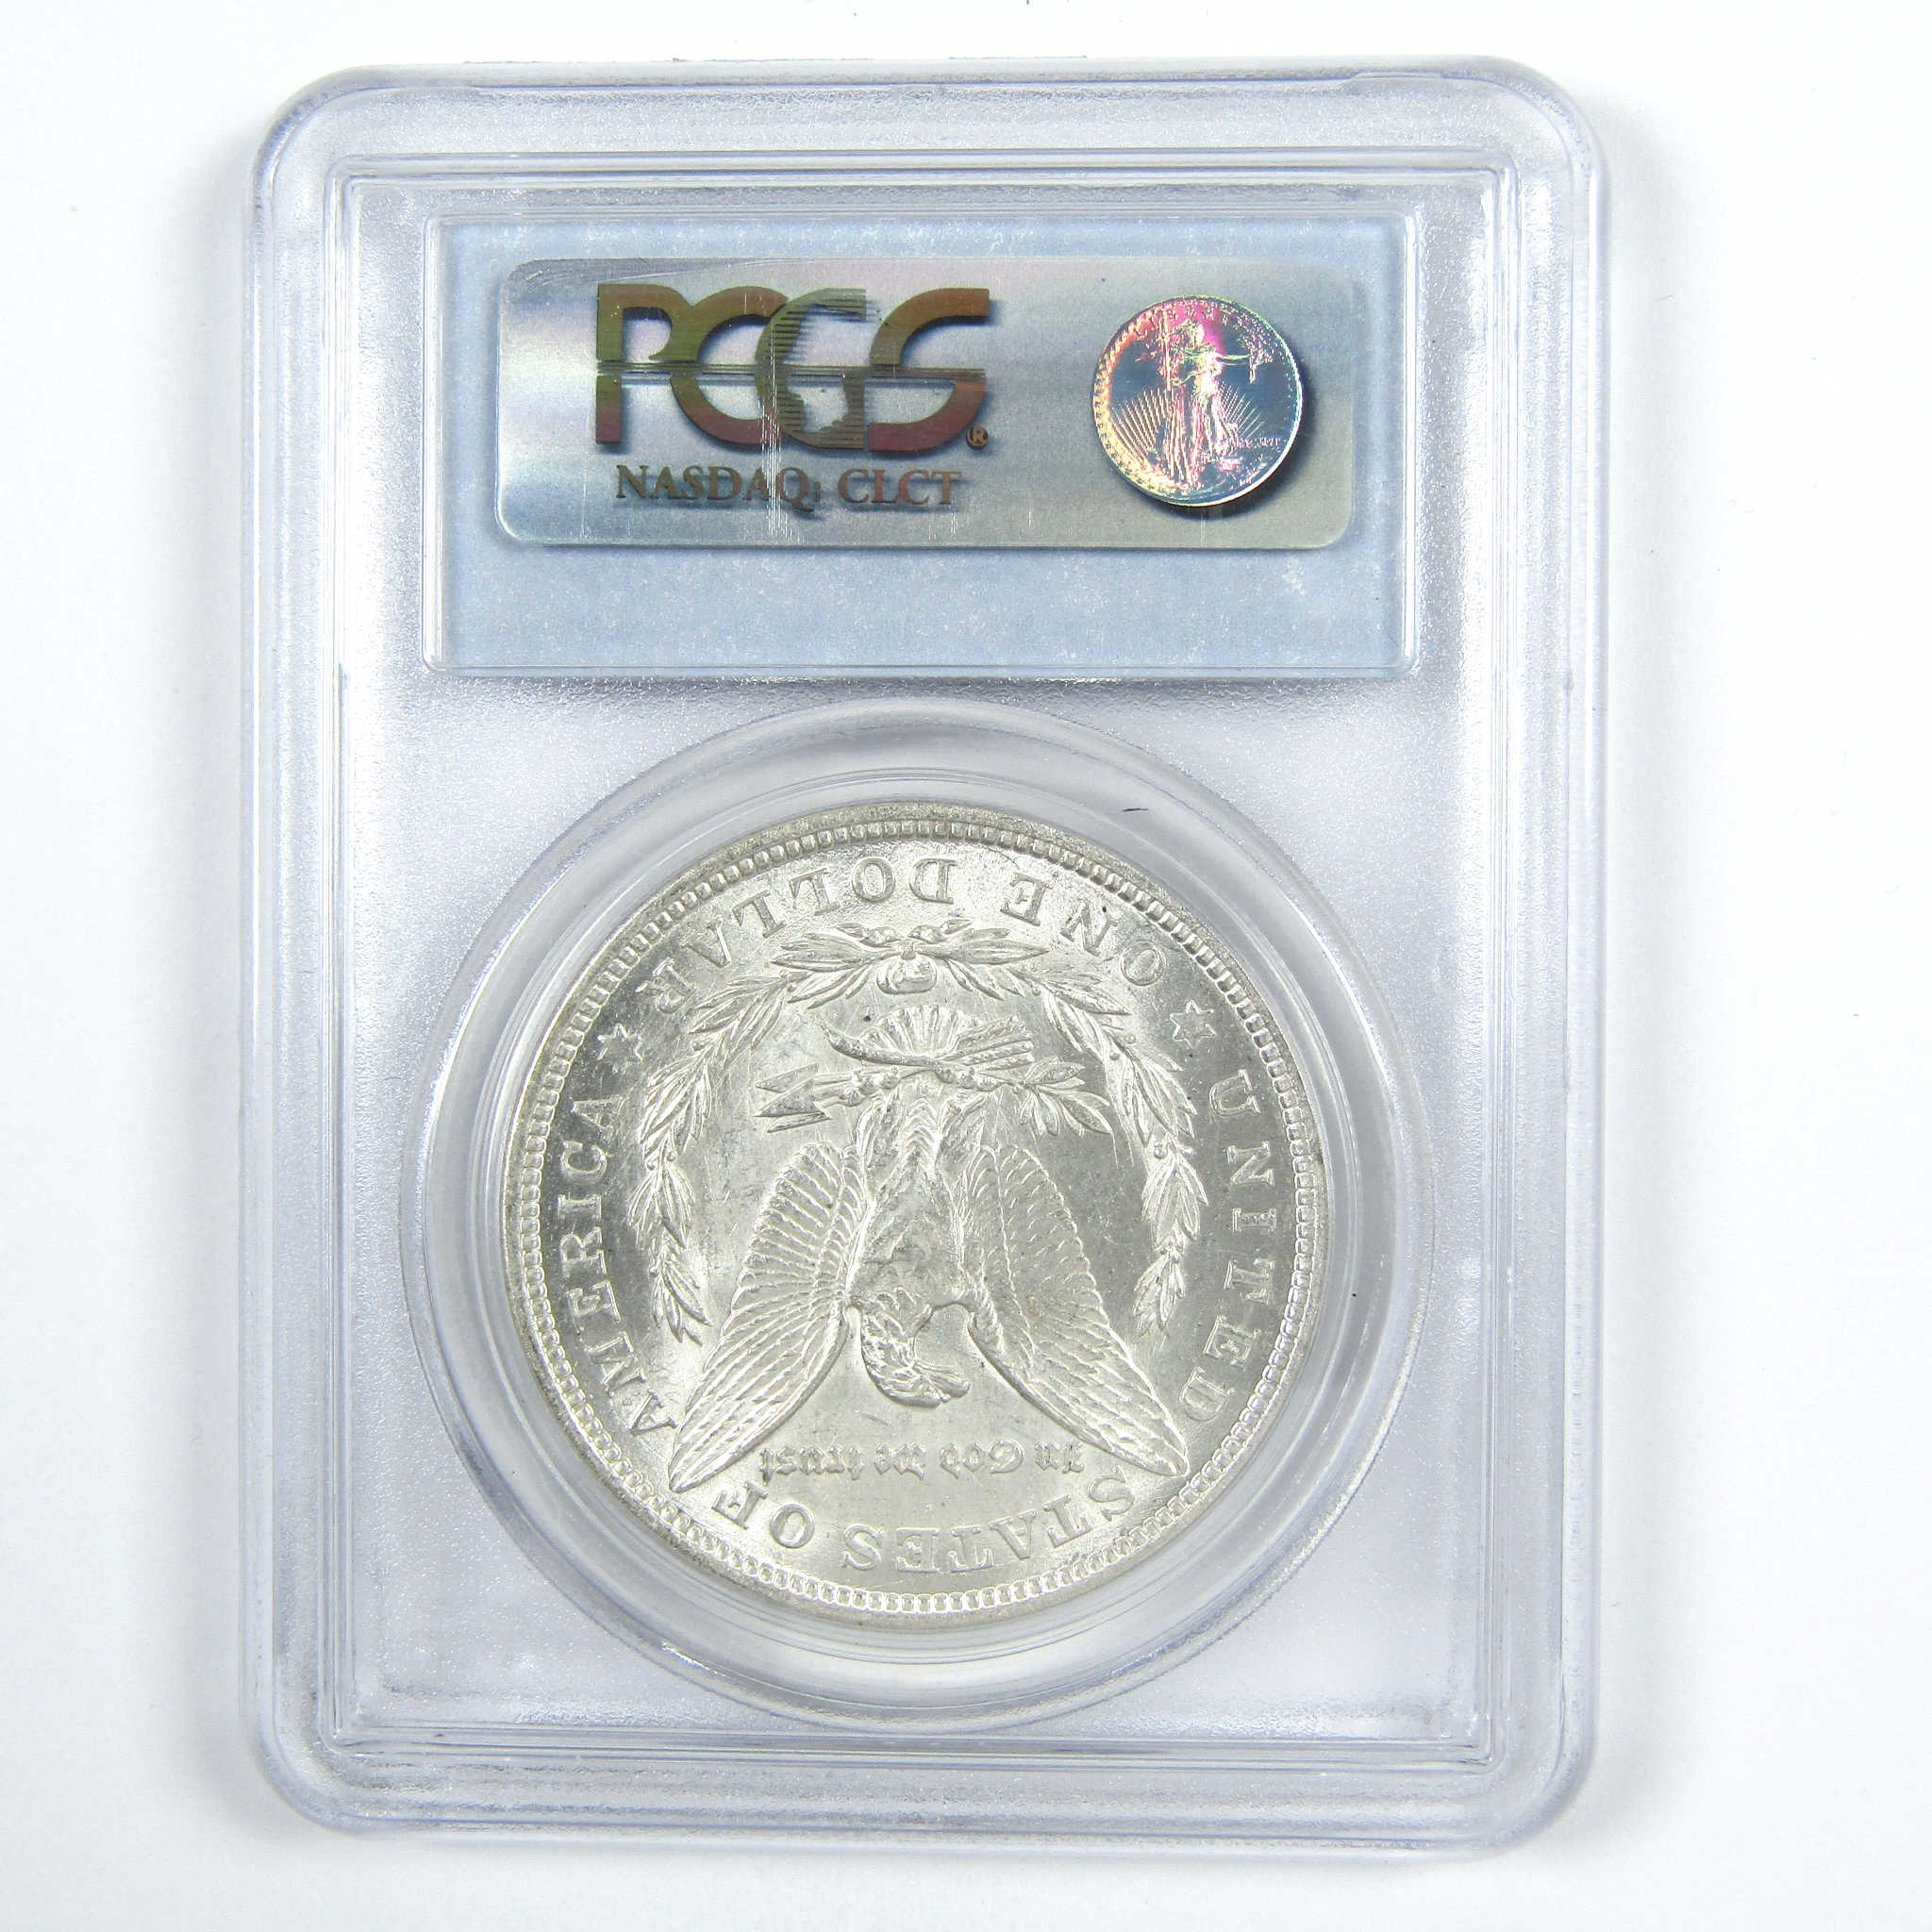 1921 Pitted Reverse Morgan Dollar AU 55 PCGS Silver $1 SKU:CPC7322 - Morgan coin - Morgan silver dollar - Morgan silver dollar for sale - Profile Coins &amp; Collectibles